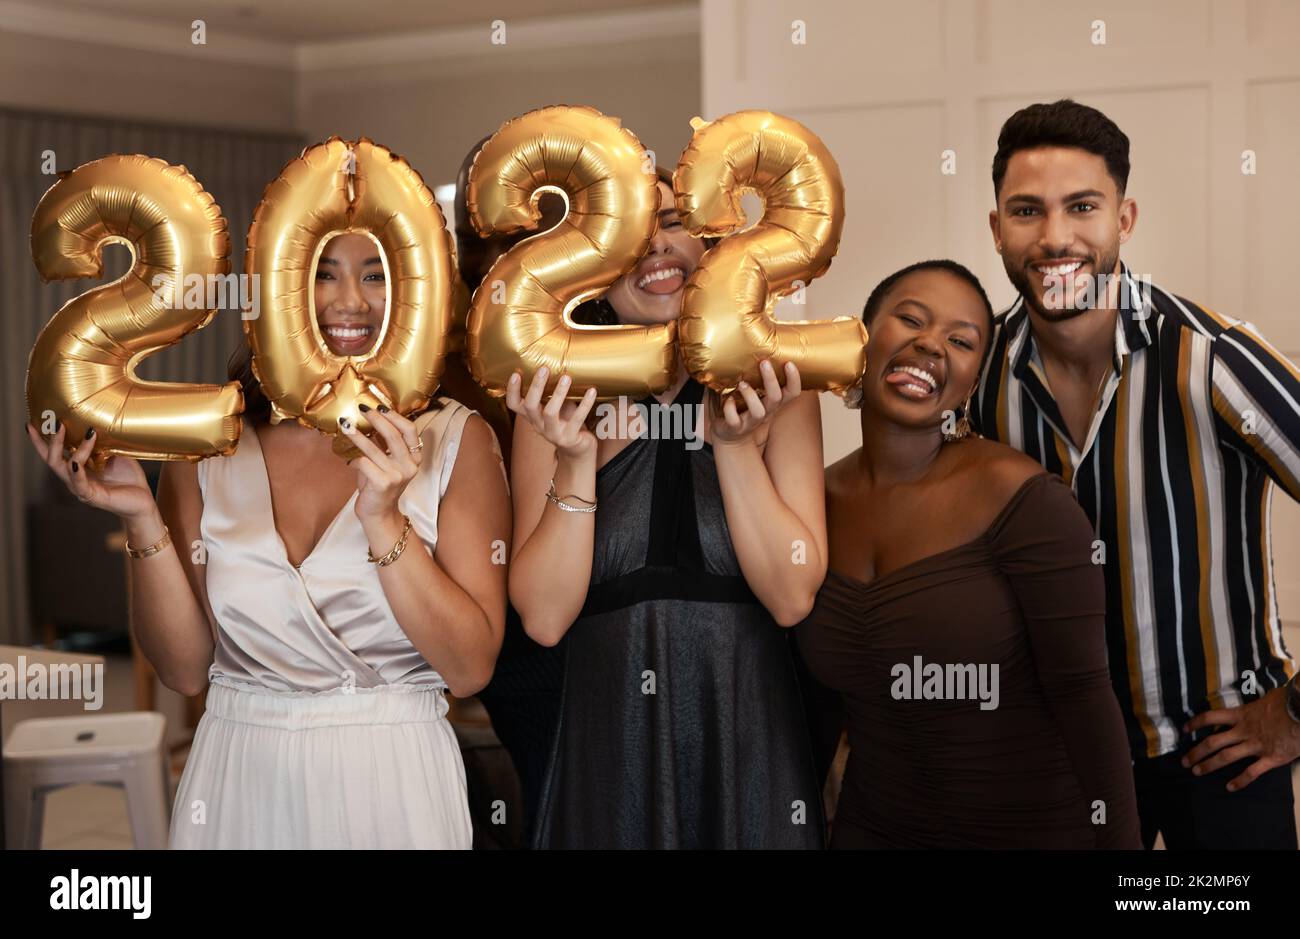 Were stoked for the New Year. Shot of a diverse group of friends standing together and holding up 2022 balloons during a New Years party. Stock Photo